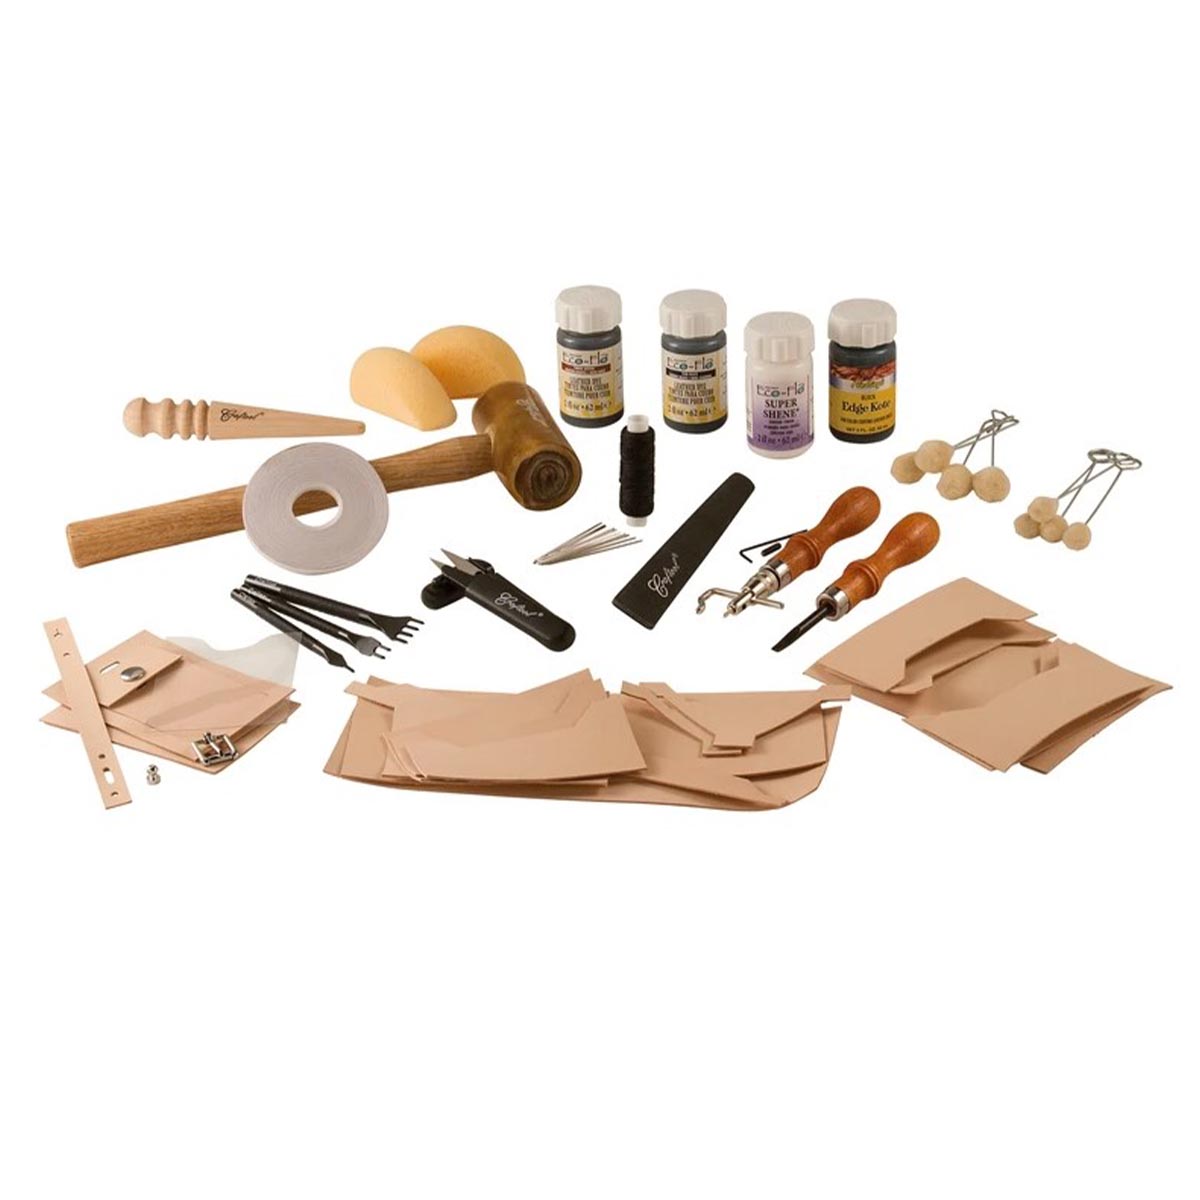 Kit complet "DELUXE LEATHERCRAFTING" - 55403